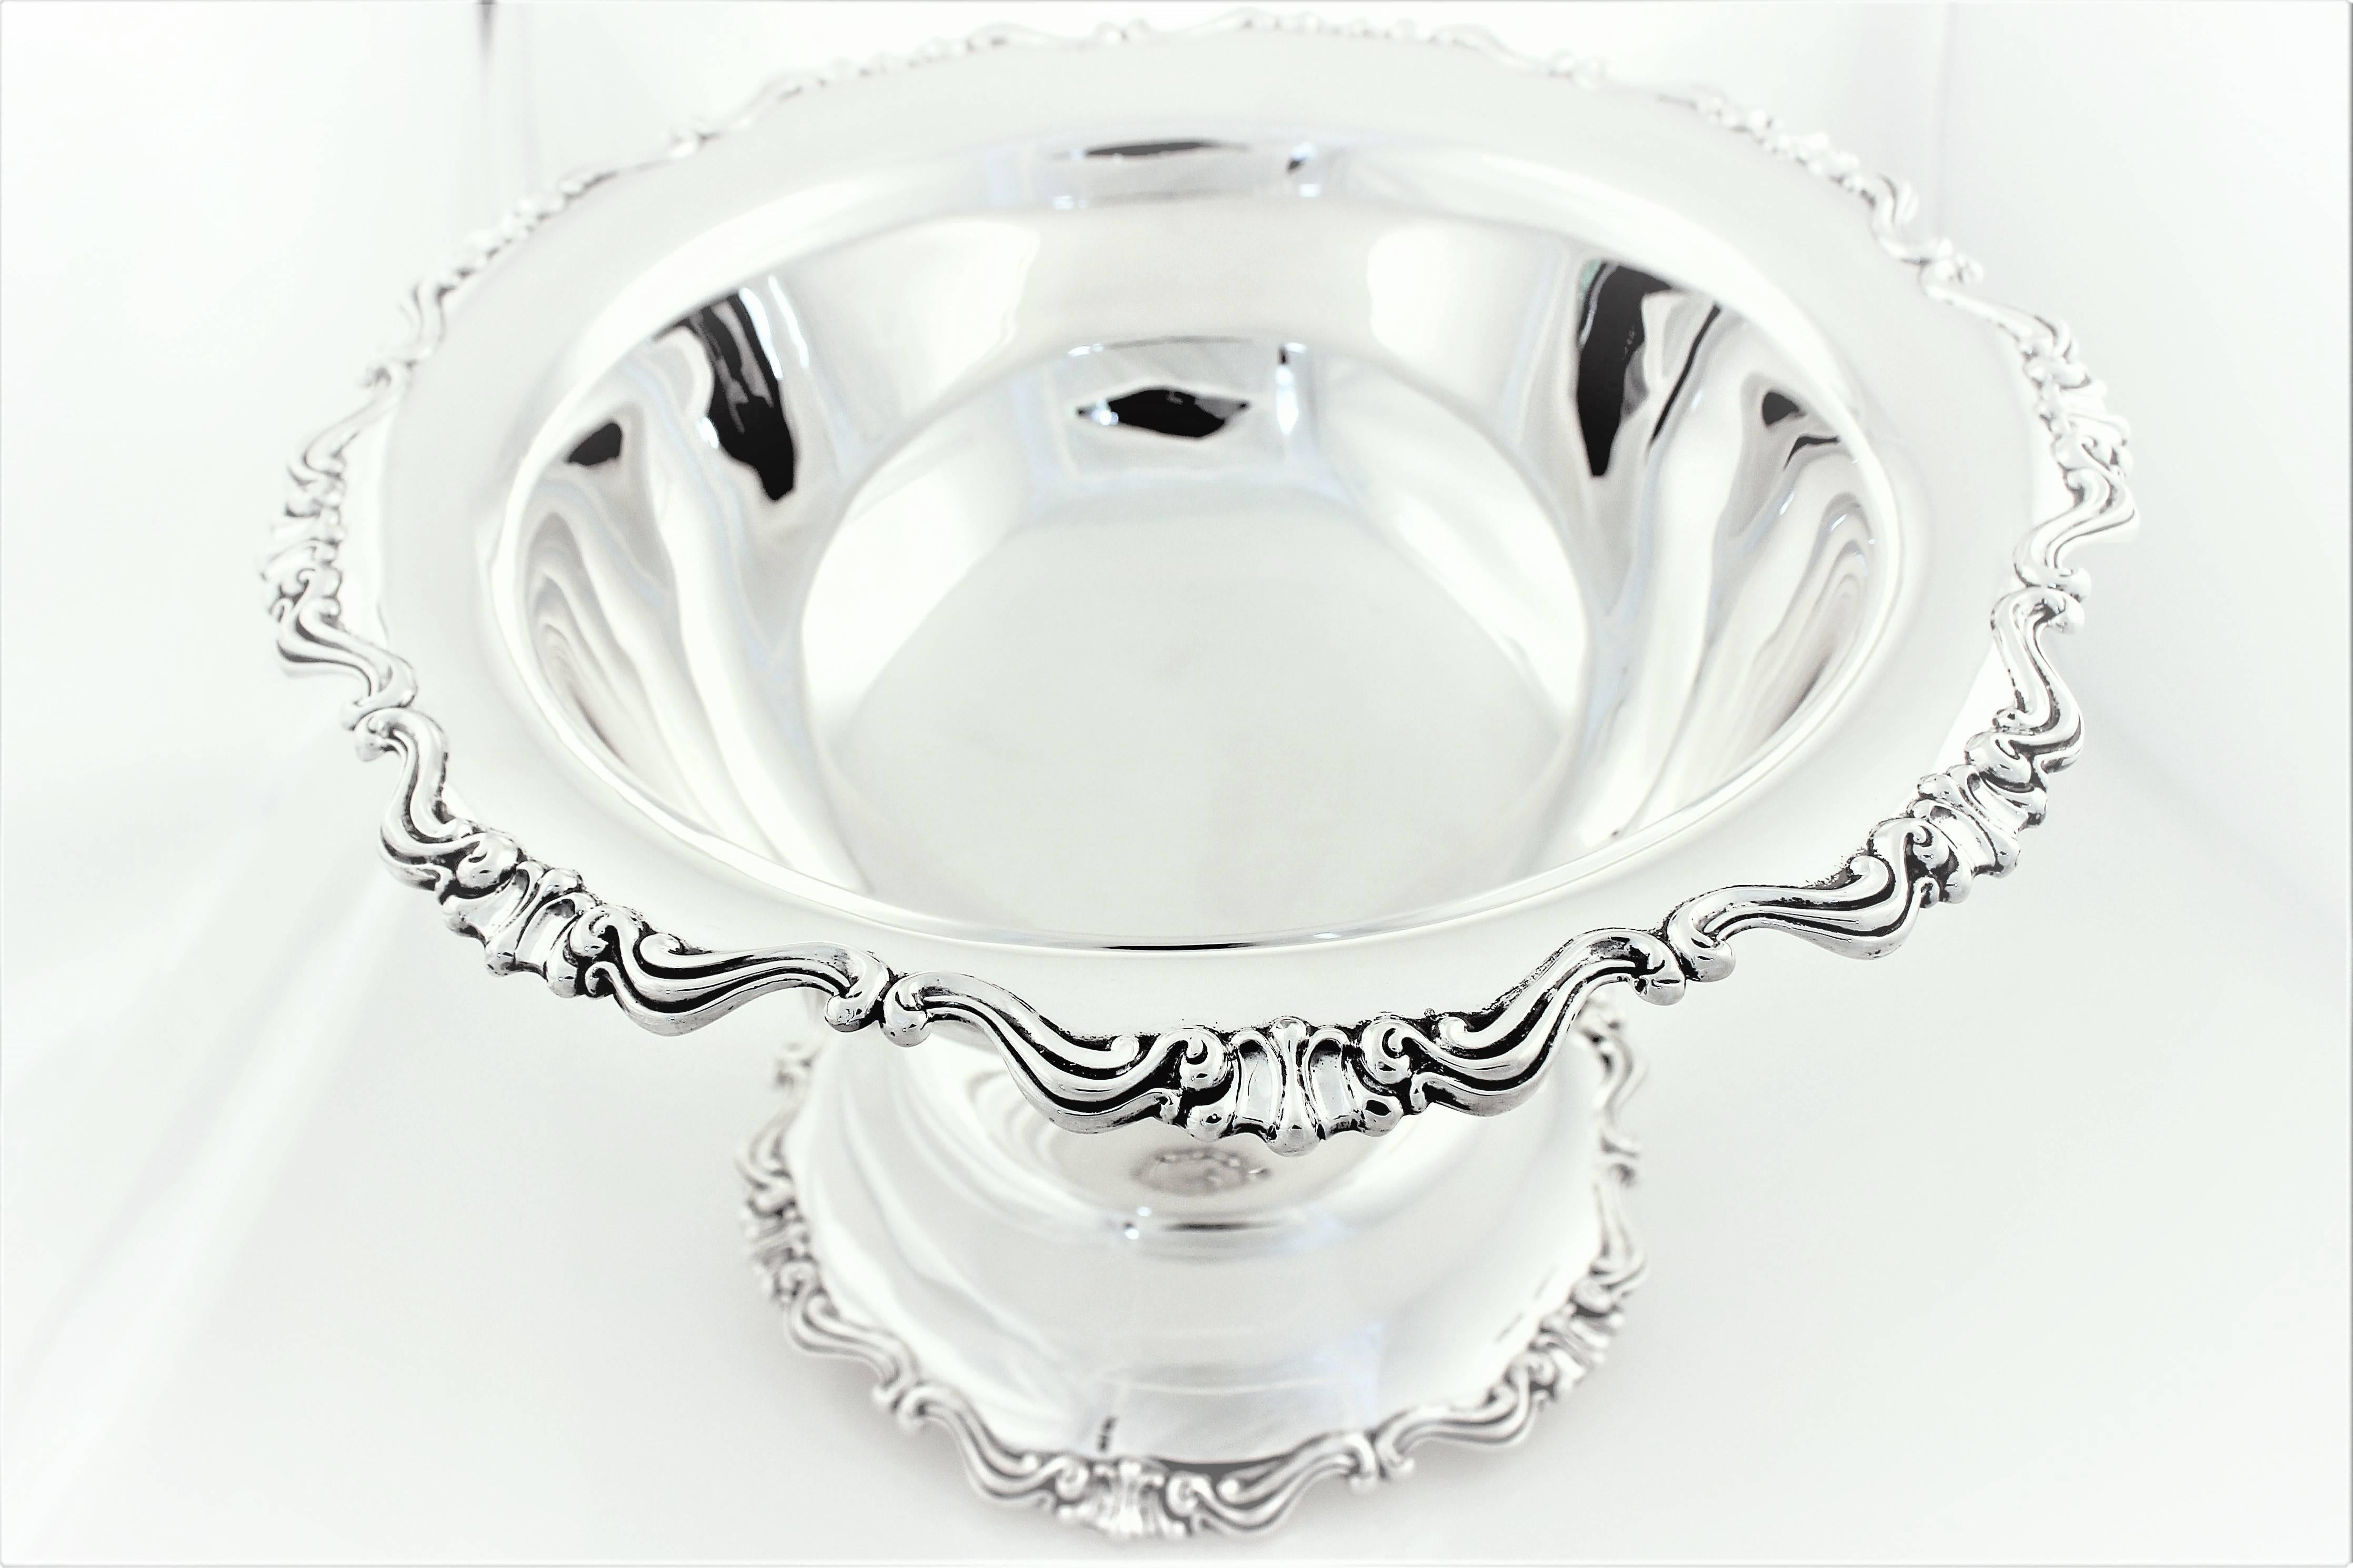 A scalloped top rim that compliments the base rim with a decorative pattern both on top and bottom. Perfect for the center of a dining room table, it's as much decorative as it is functional.